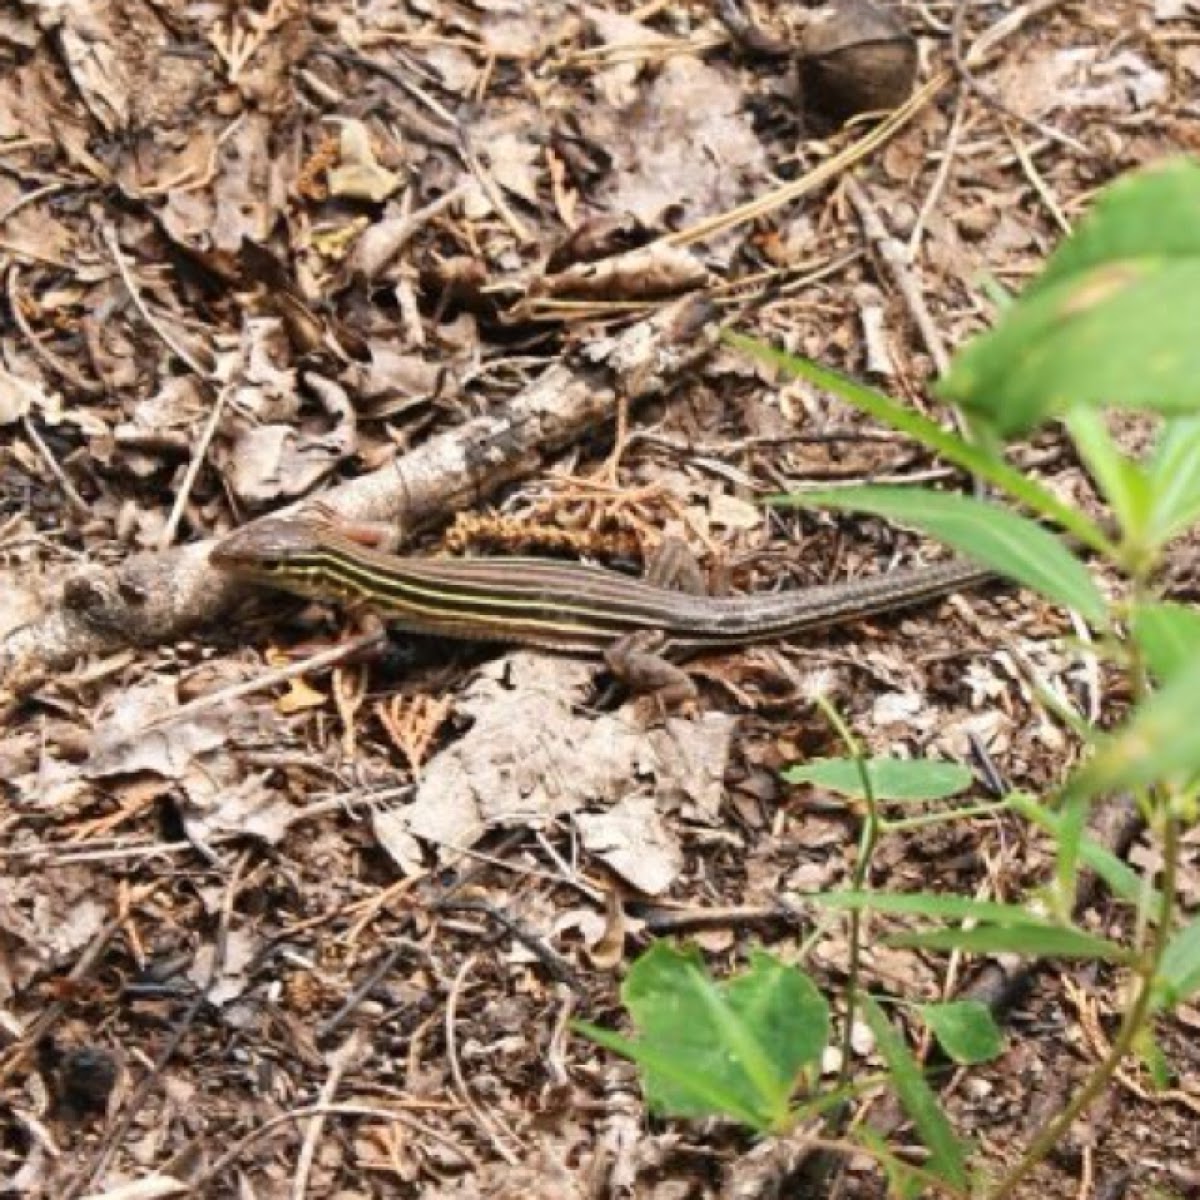 Six-lined Racer